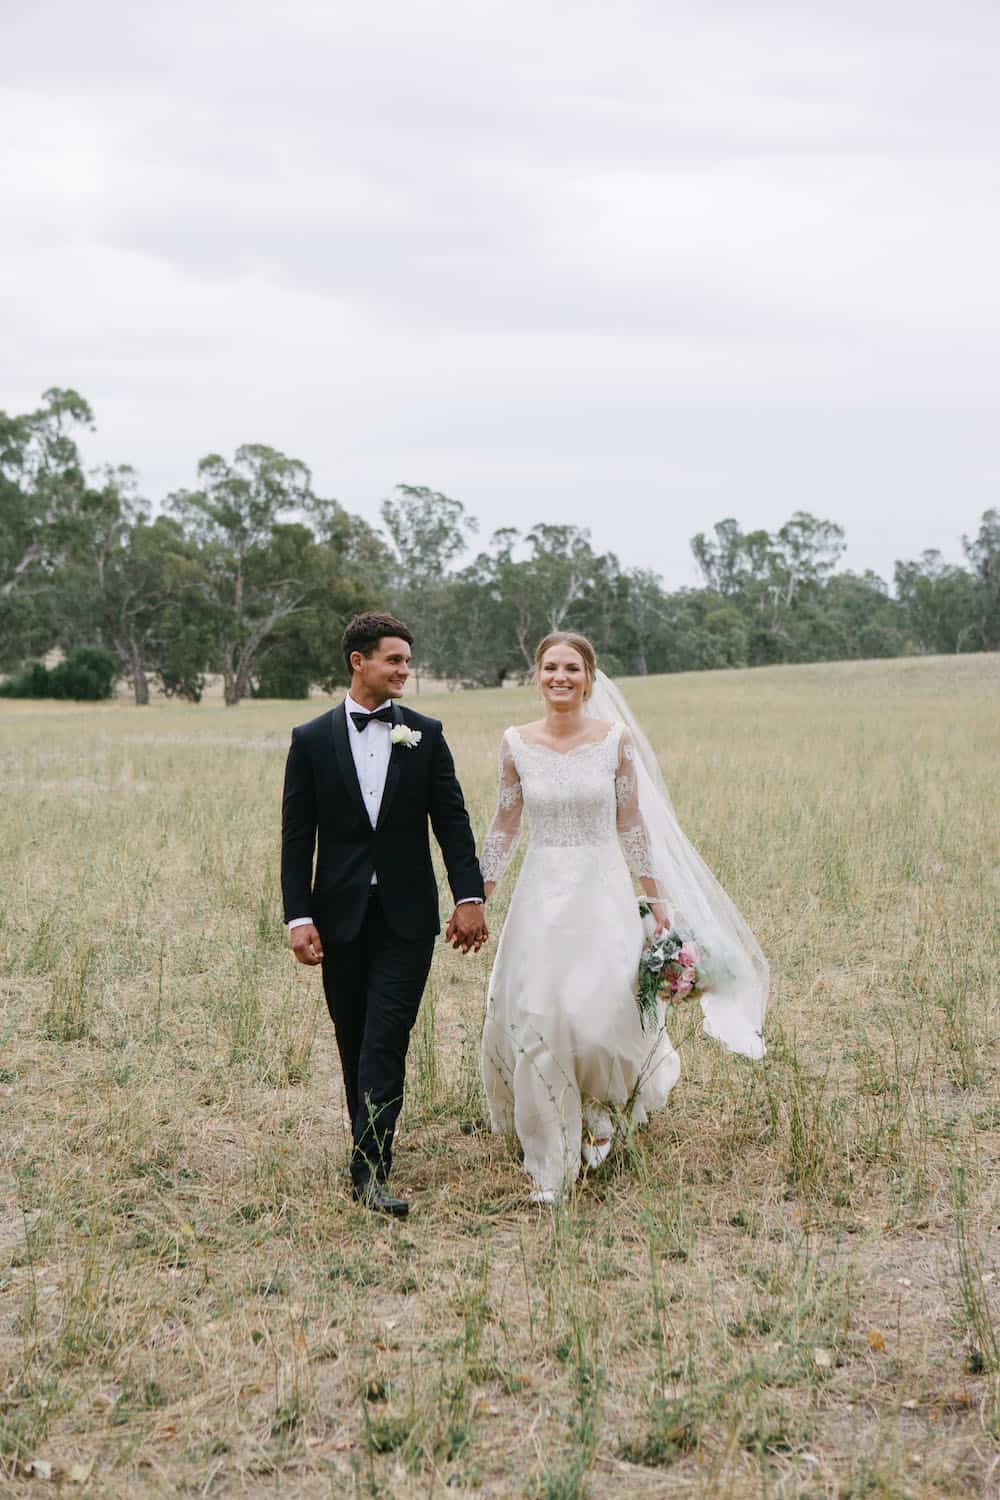 Killeen Station Barn Wedding Melbourne Mia and Brents Wedding Madeleine Chiller Photography 2